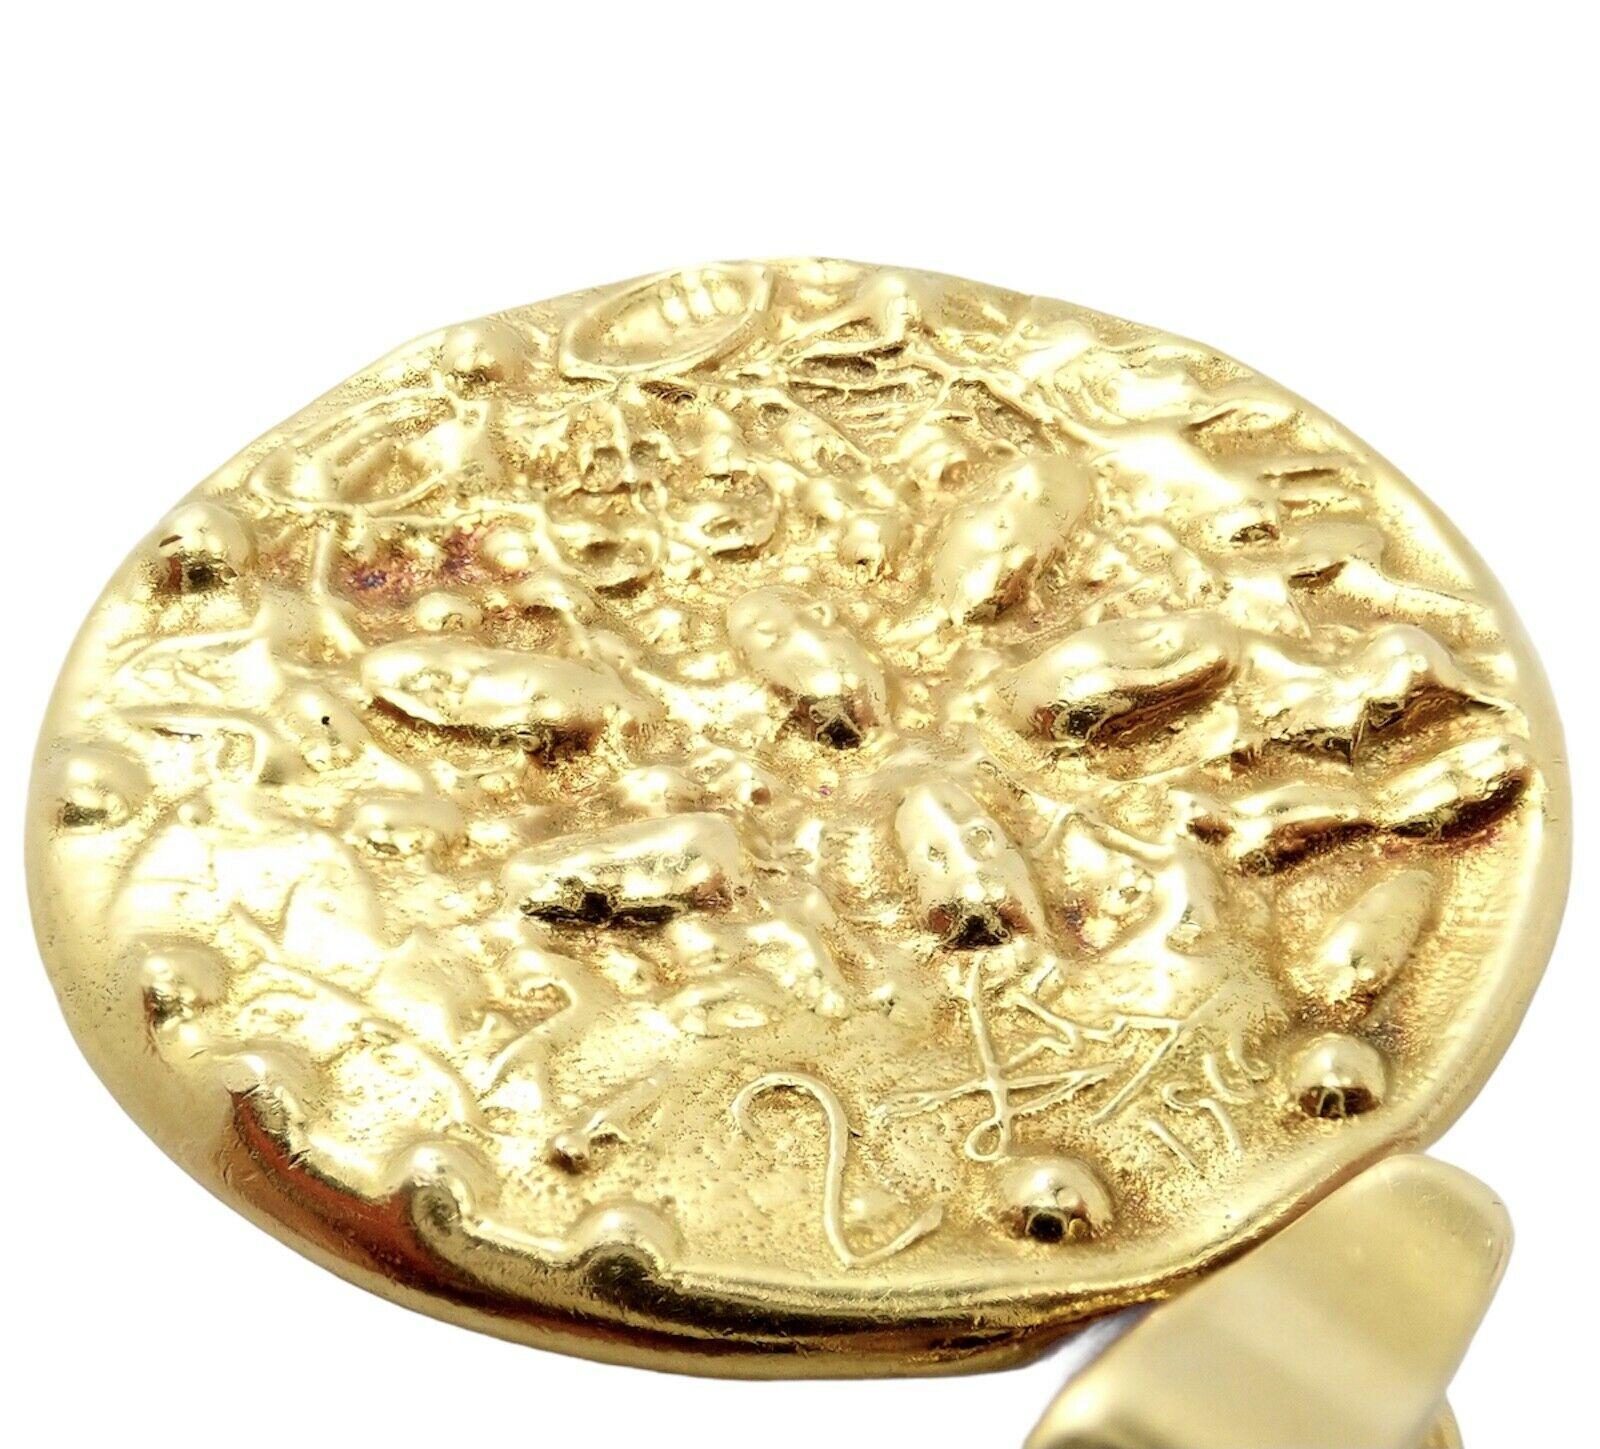 22k & 18k Yellow Gold Pendant by Salvador Dali D'or for Piaget.  
Details:  
Measurements: 27mm x 40mm, Coin is 27mm in size
Chain: Length 16